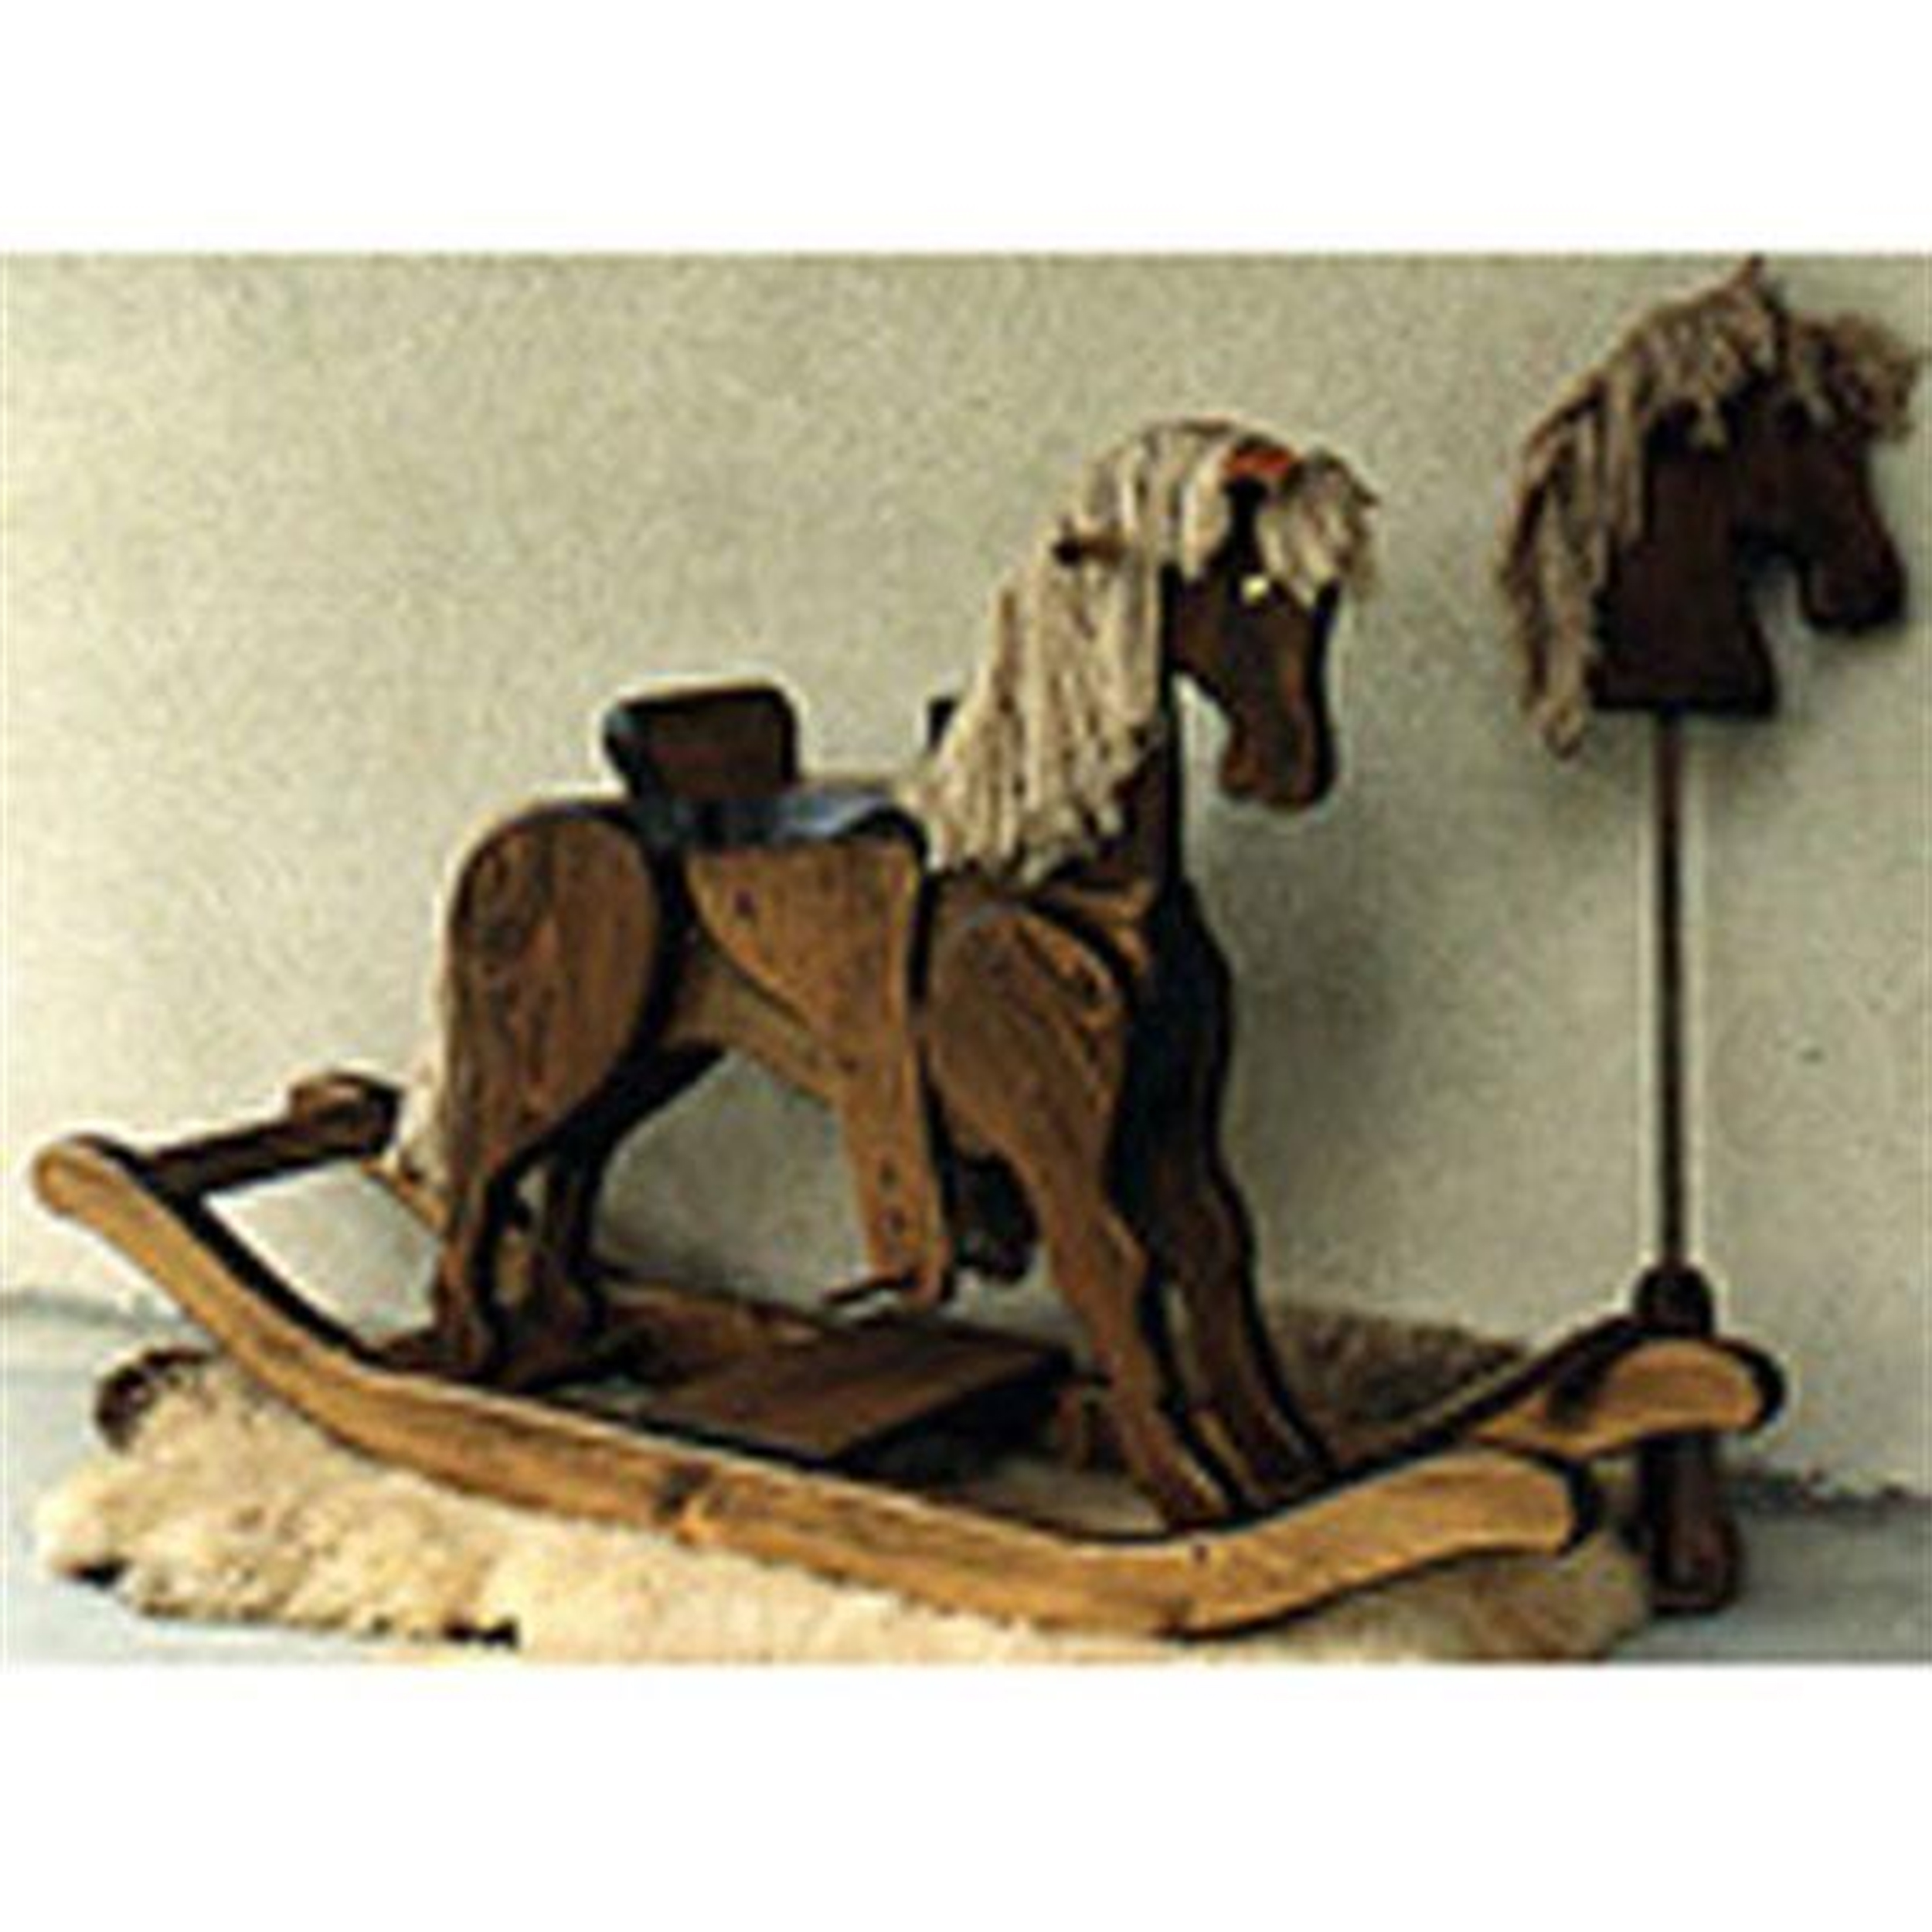 Woodworking Project Paper Plan To Build Rocking And Hobby Horse